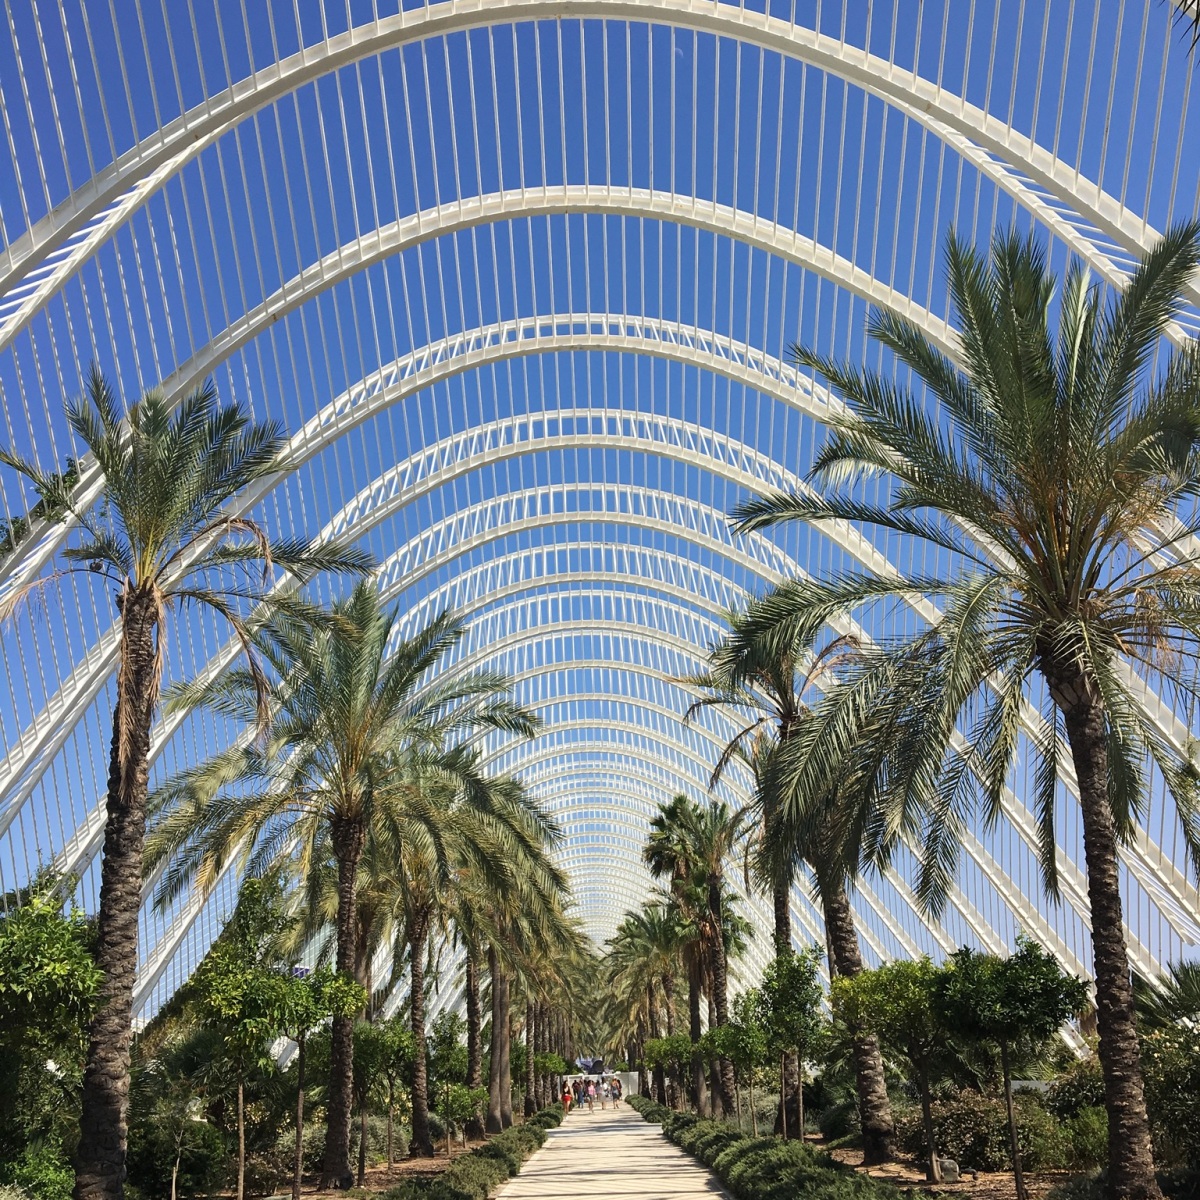 72 HOURS IN… VALENCIA